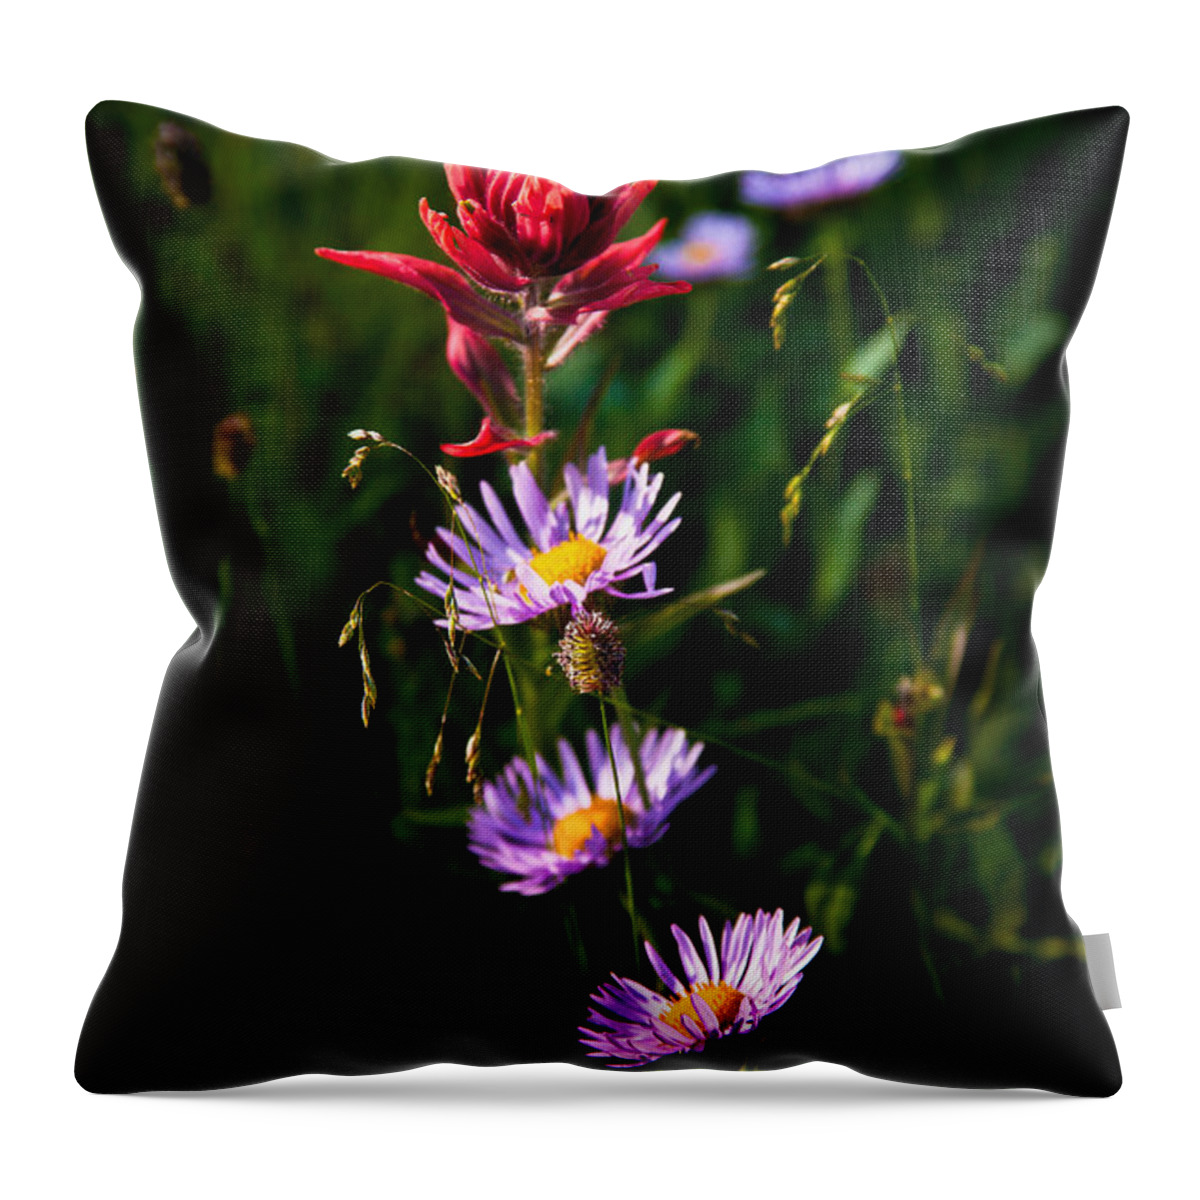 Landscape Throw Pillow featuring the photograph Wildflowers by Steven Reed